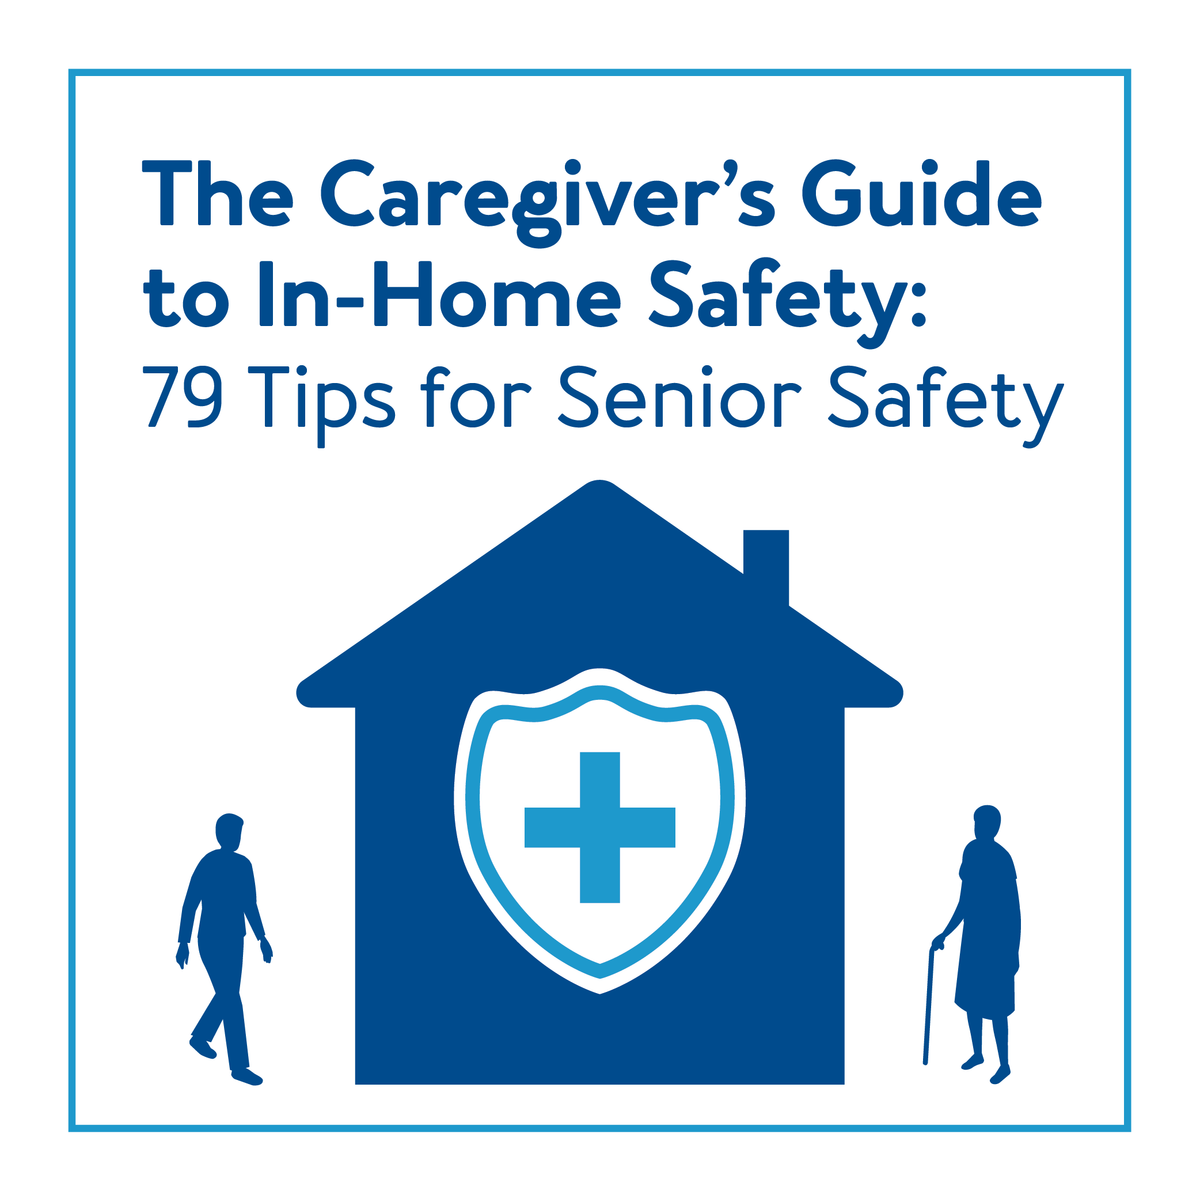 Home graphic with two outlines of people, text “The Caregiver’s Guide to In-Home Safety: 79 Tips for Senior Safety.